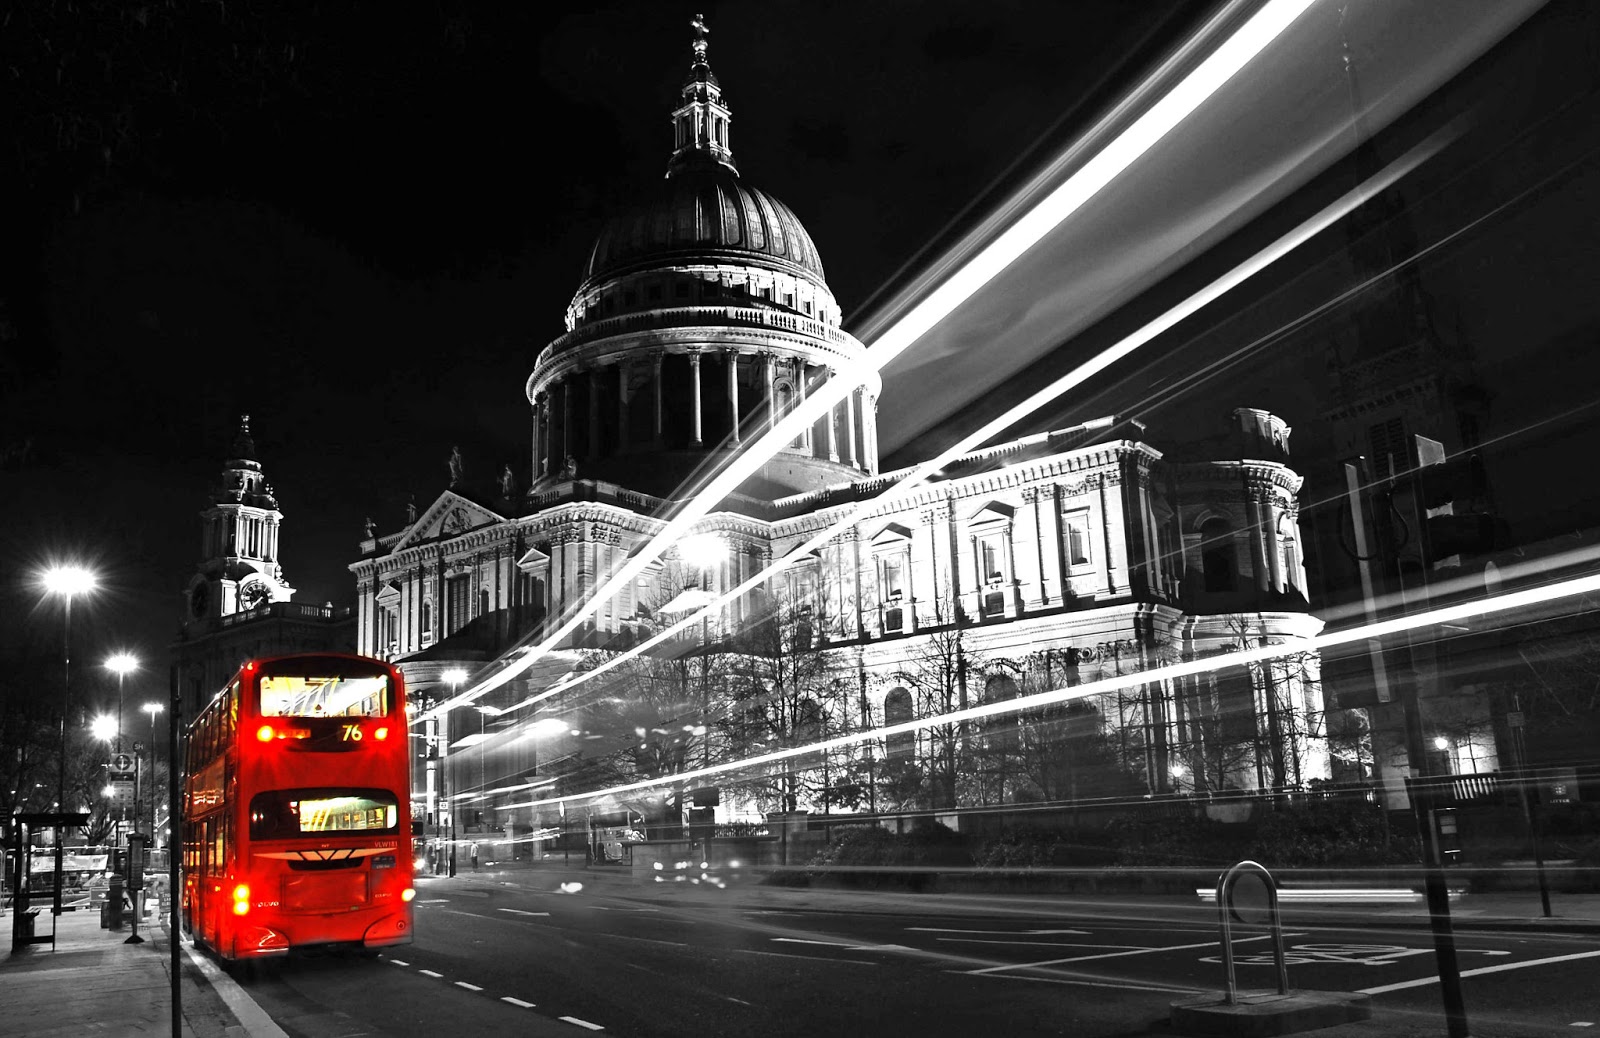 Also visit London Bus and London City Photography